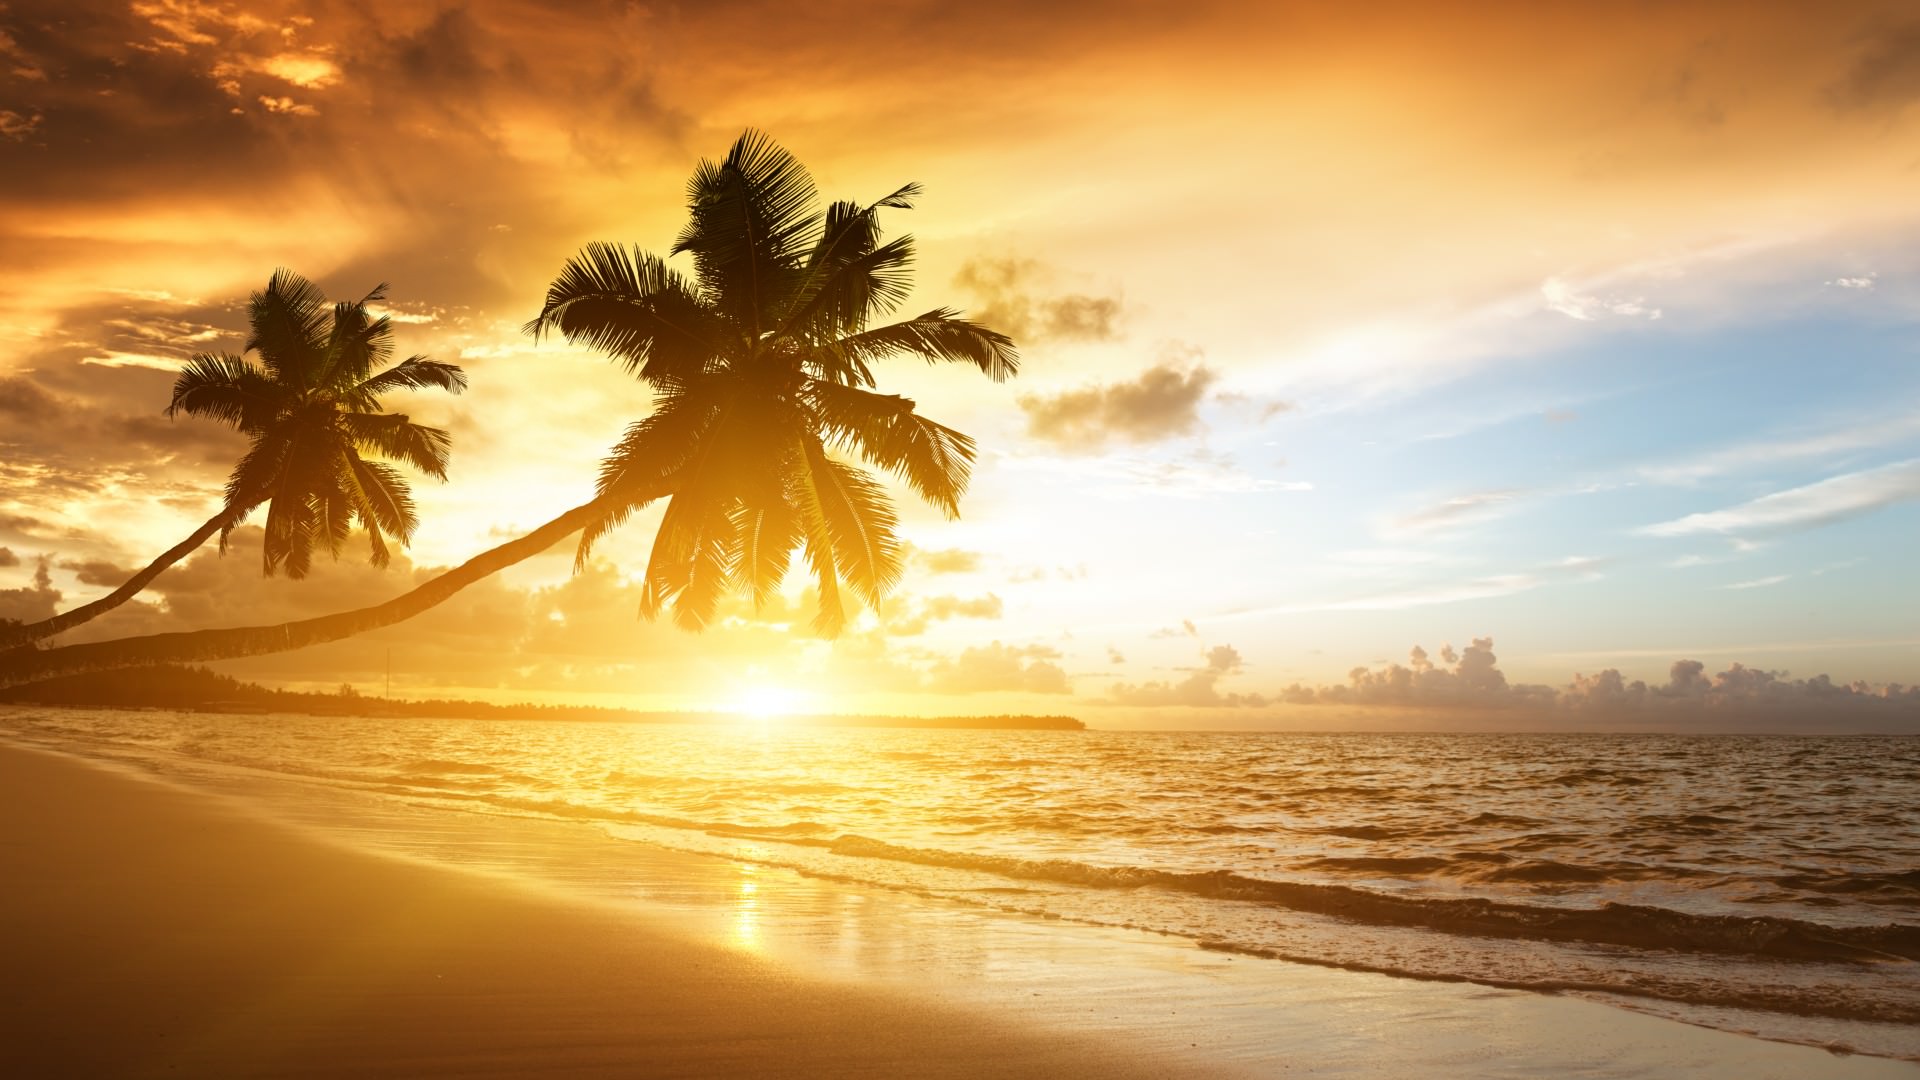 21+ Beach Sunrise Wallpapers, Backgrounds, Images | FreeCreatives